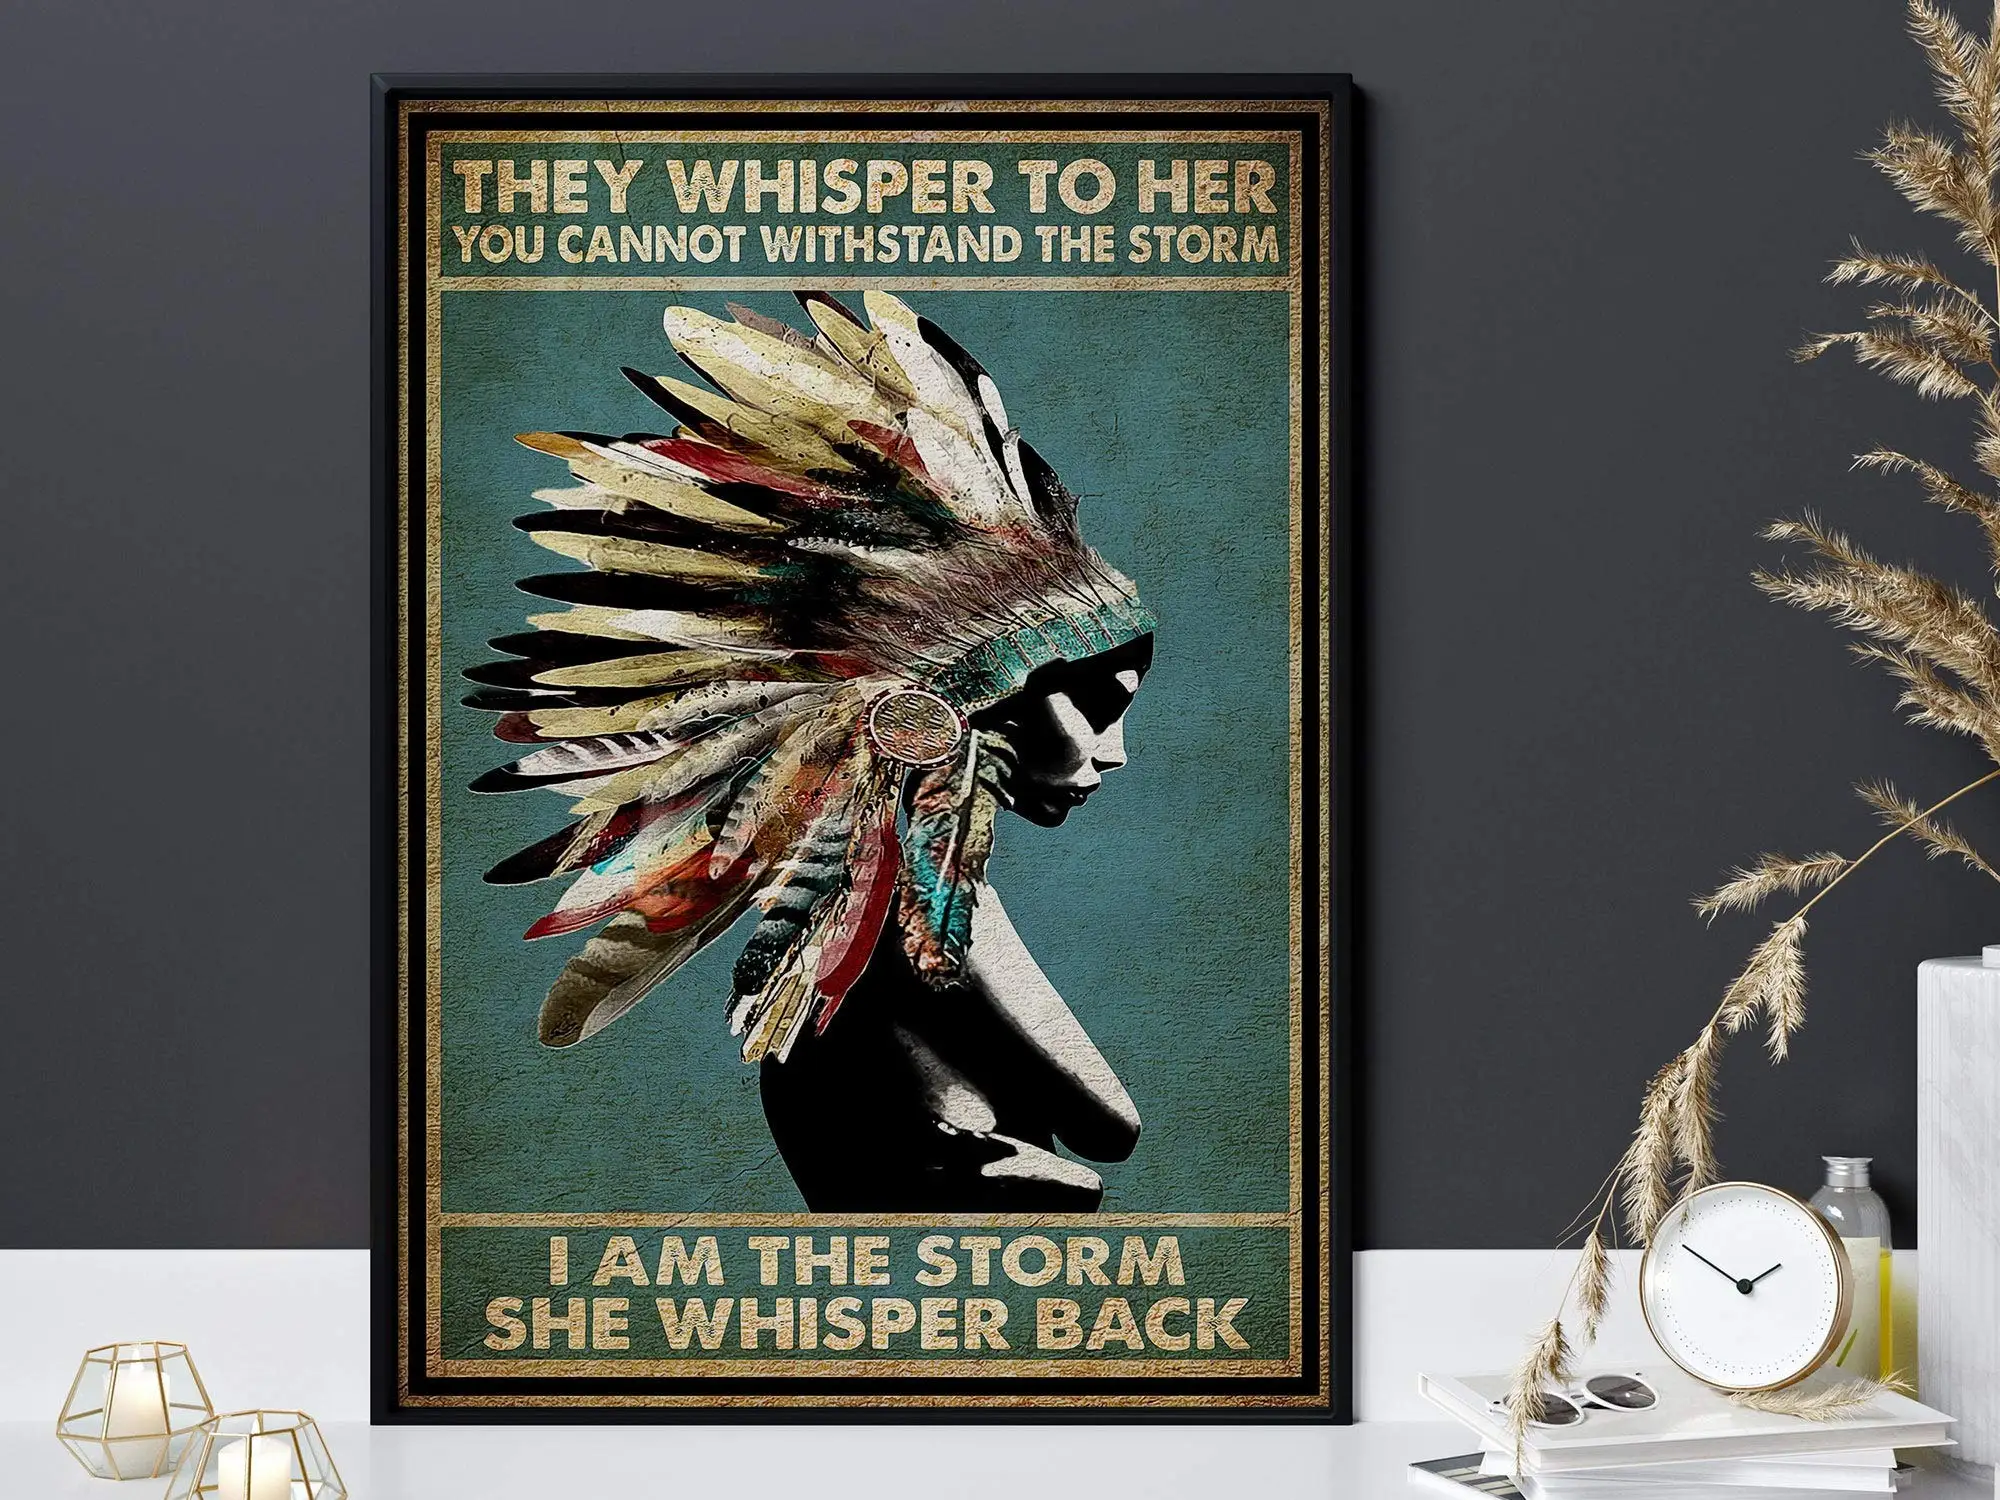 

I am The Storm She Whispered Back Poster, Retro Girl Art, Dragonfly Print Wall Art, Funny Home Decor Reproduction Retro Metal Si